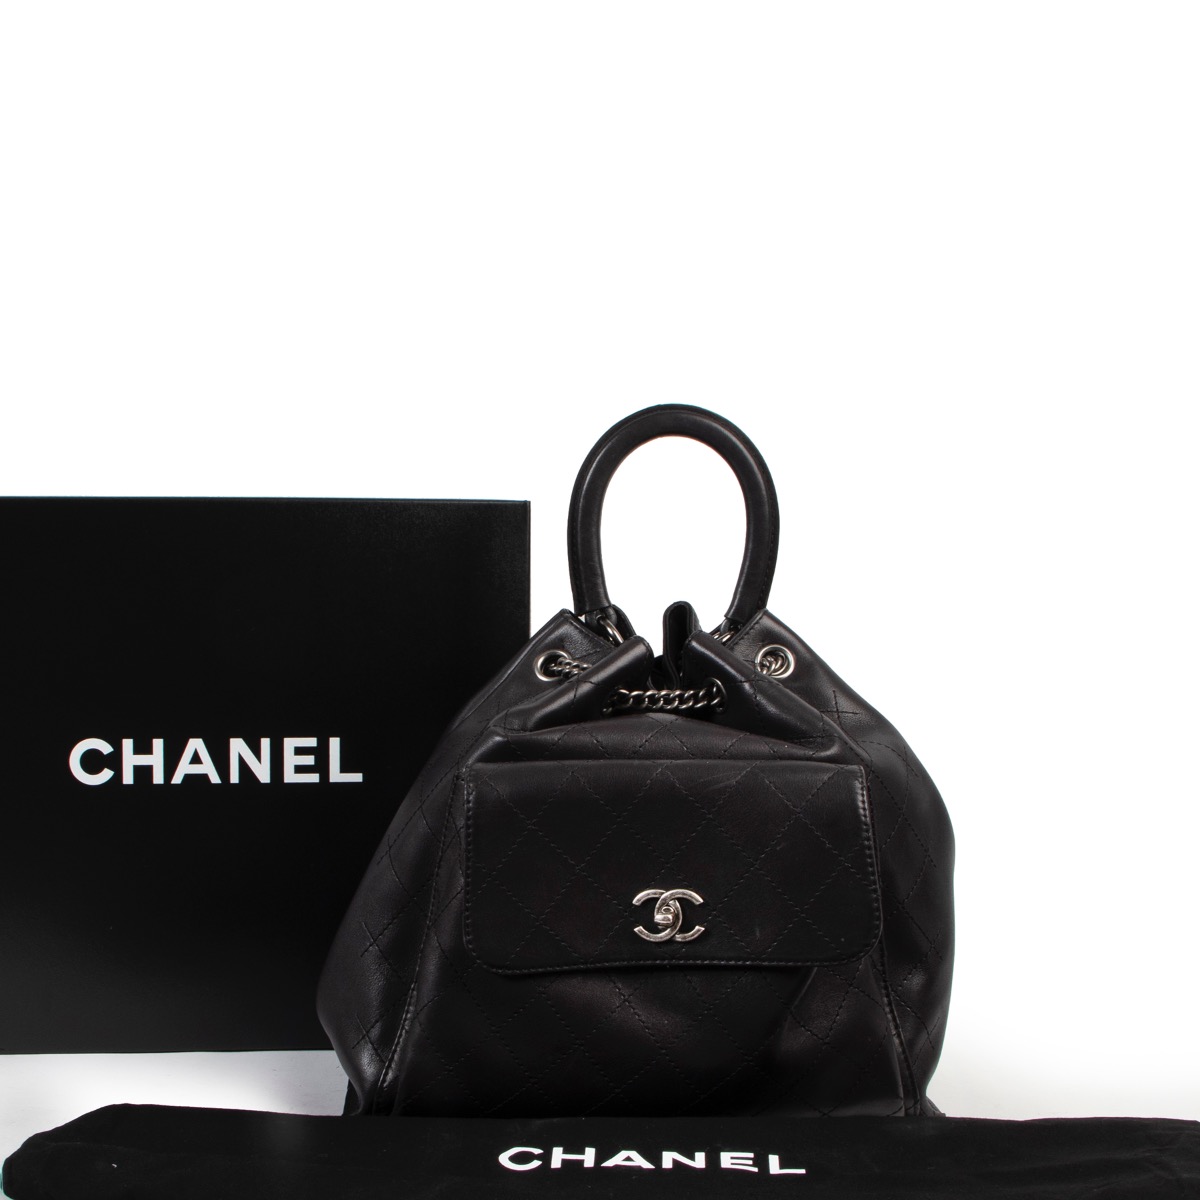 Chanel Black Stitched Leather Urban Luxury Drawstring Backpack